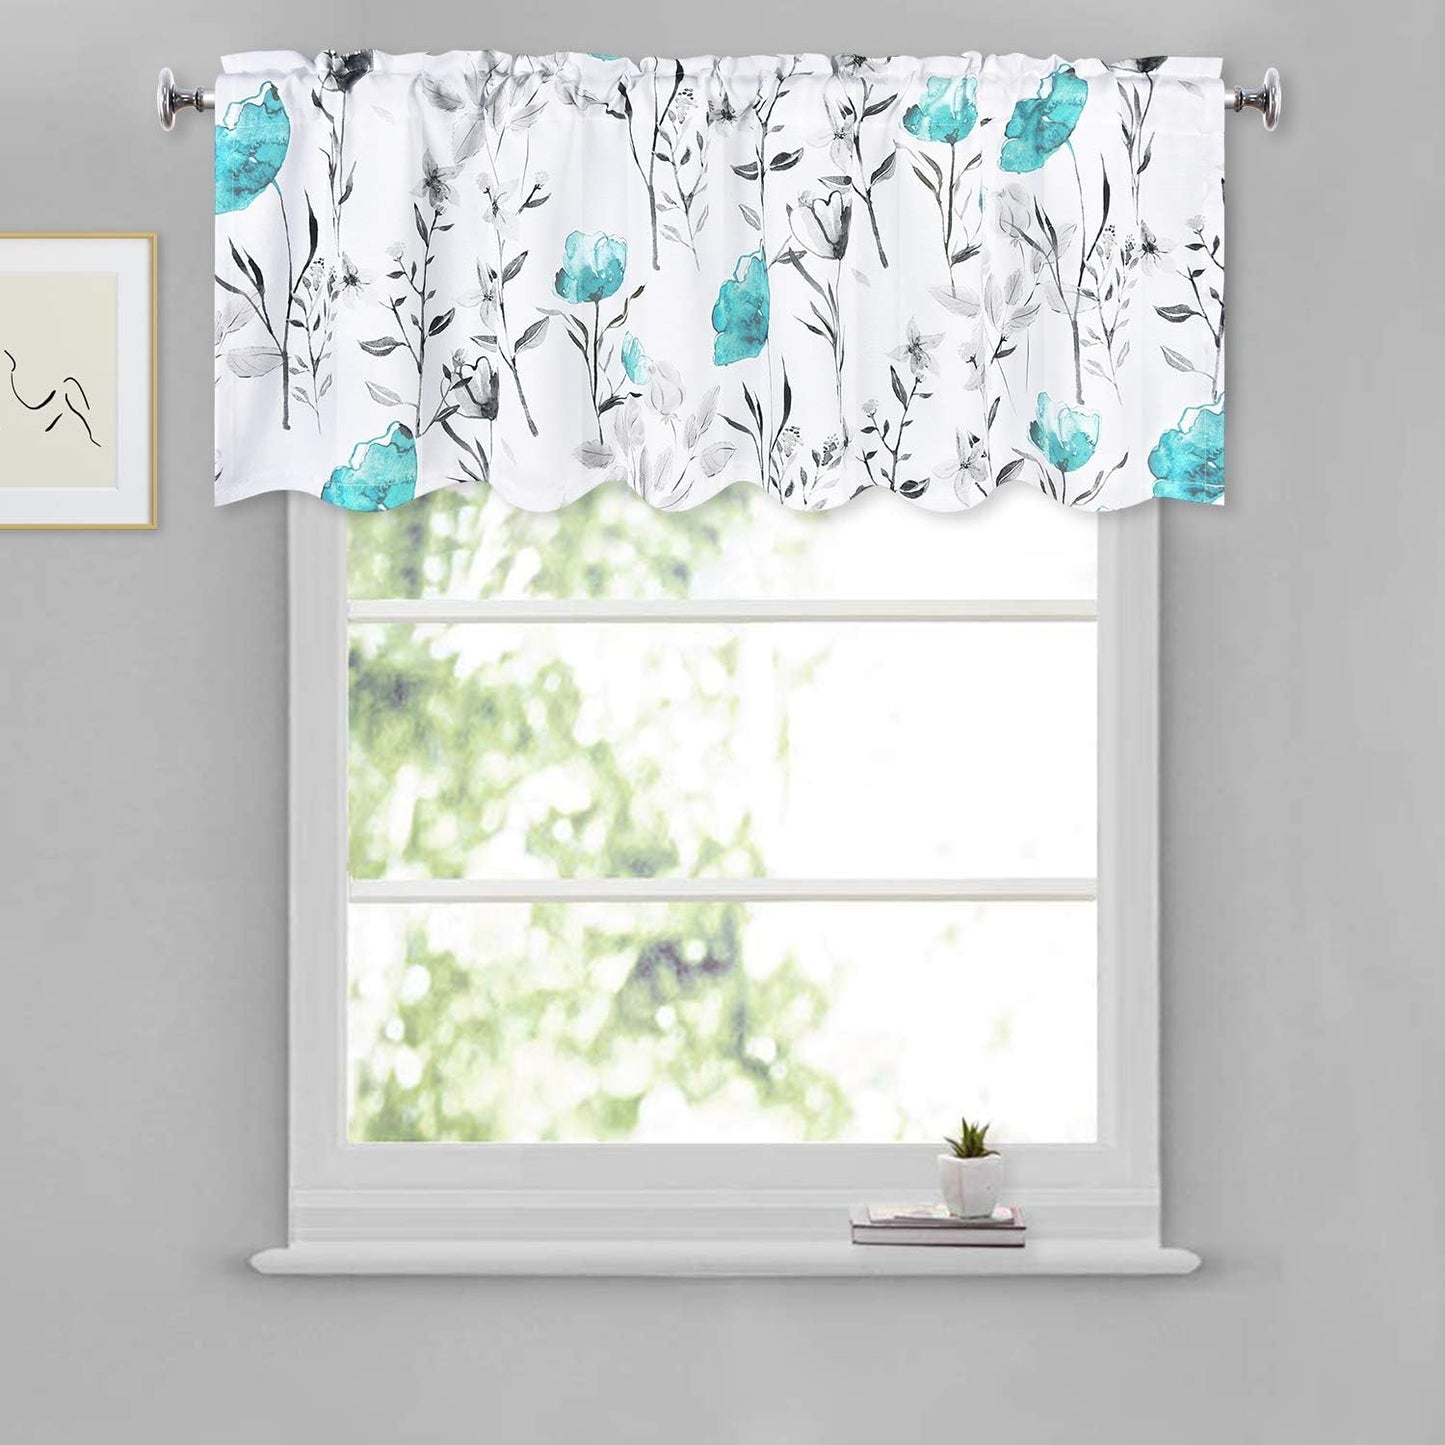 Likiyol Floral Kithchen Curtains 36 Inch Watercolor Flower Leaves Tier Curtains, Yellow and Gray Floral Cafe Curtains, Rod Pocket Small Window Curtain for Cafe Bathroom Bedroom Drapes  Likiyol Teal 18"L X 52"W 